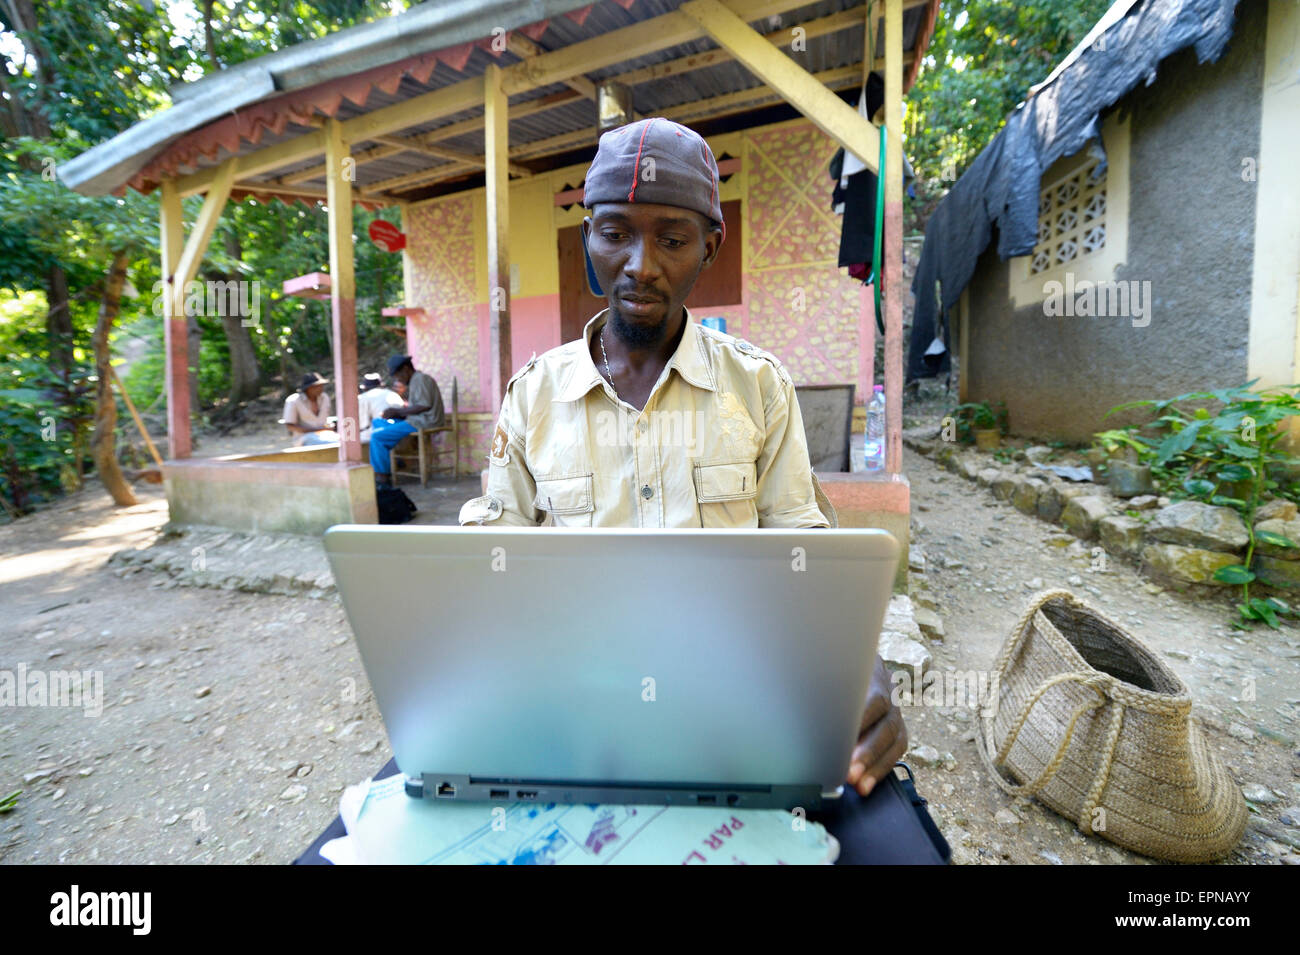 Man, 34 years old, sitting in front of his house with a laptop, Riviere Froide, Haiti Stock Photo